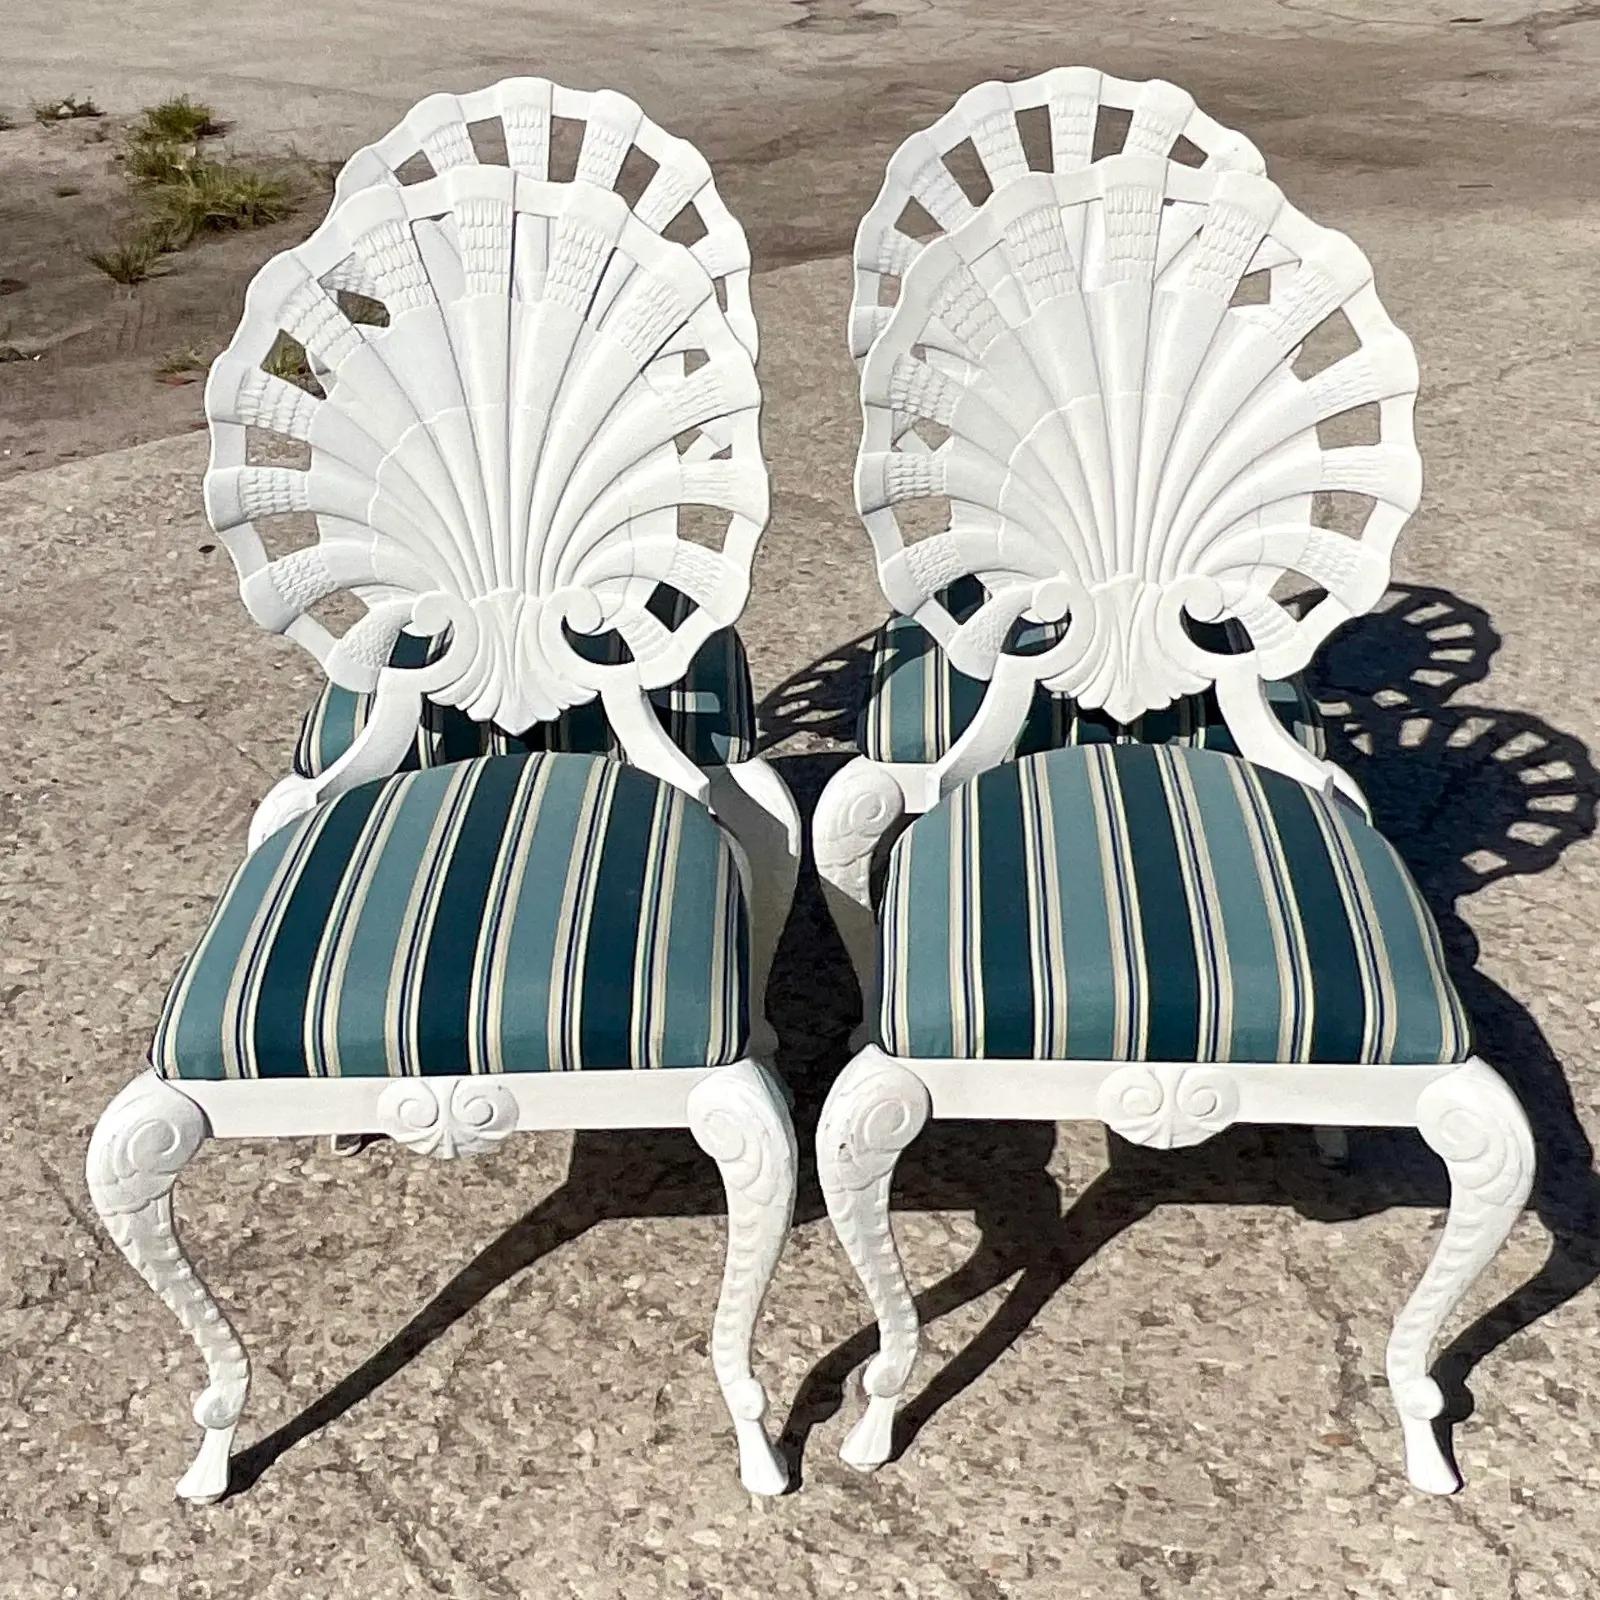 Fabulous set of four vintage Coastal outdoor dining chairs. Made by the iconic Brown Jordan. Done in a cast aluminum with a bright white finish. A chic striped upholstery in shades of blue. Unmarked. Acquired from a Palm Beach estate.